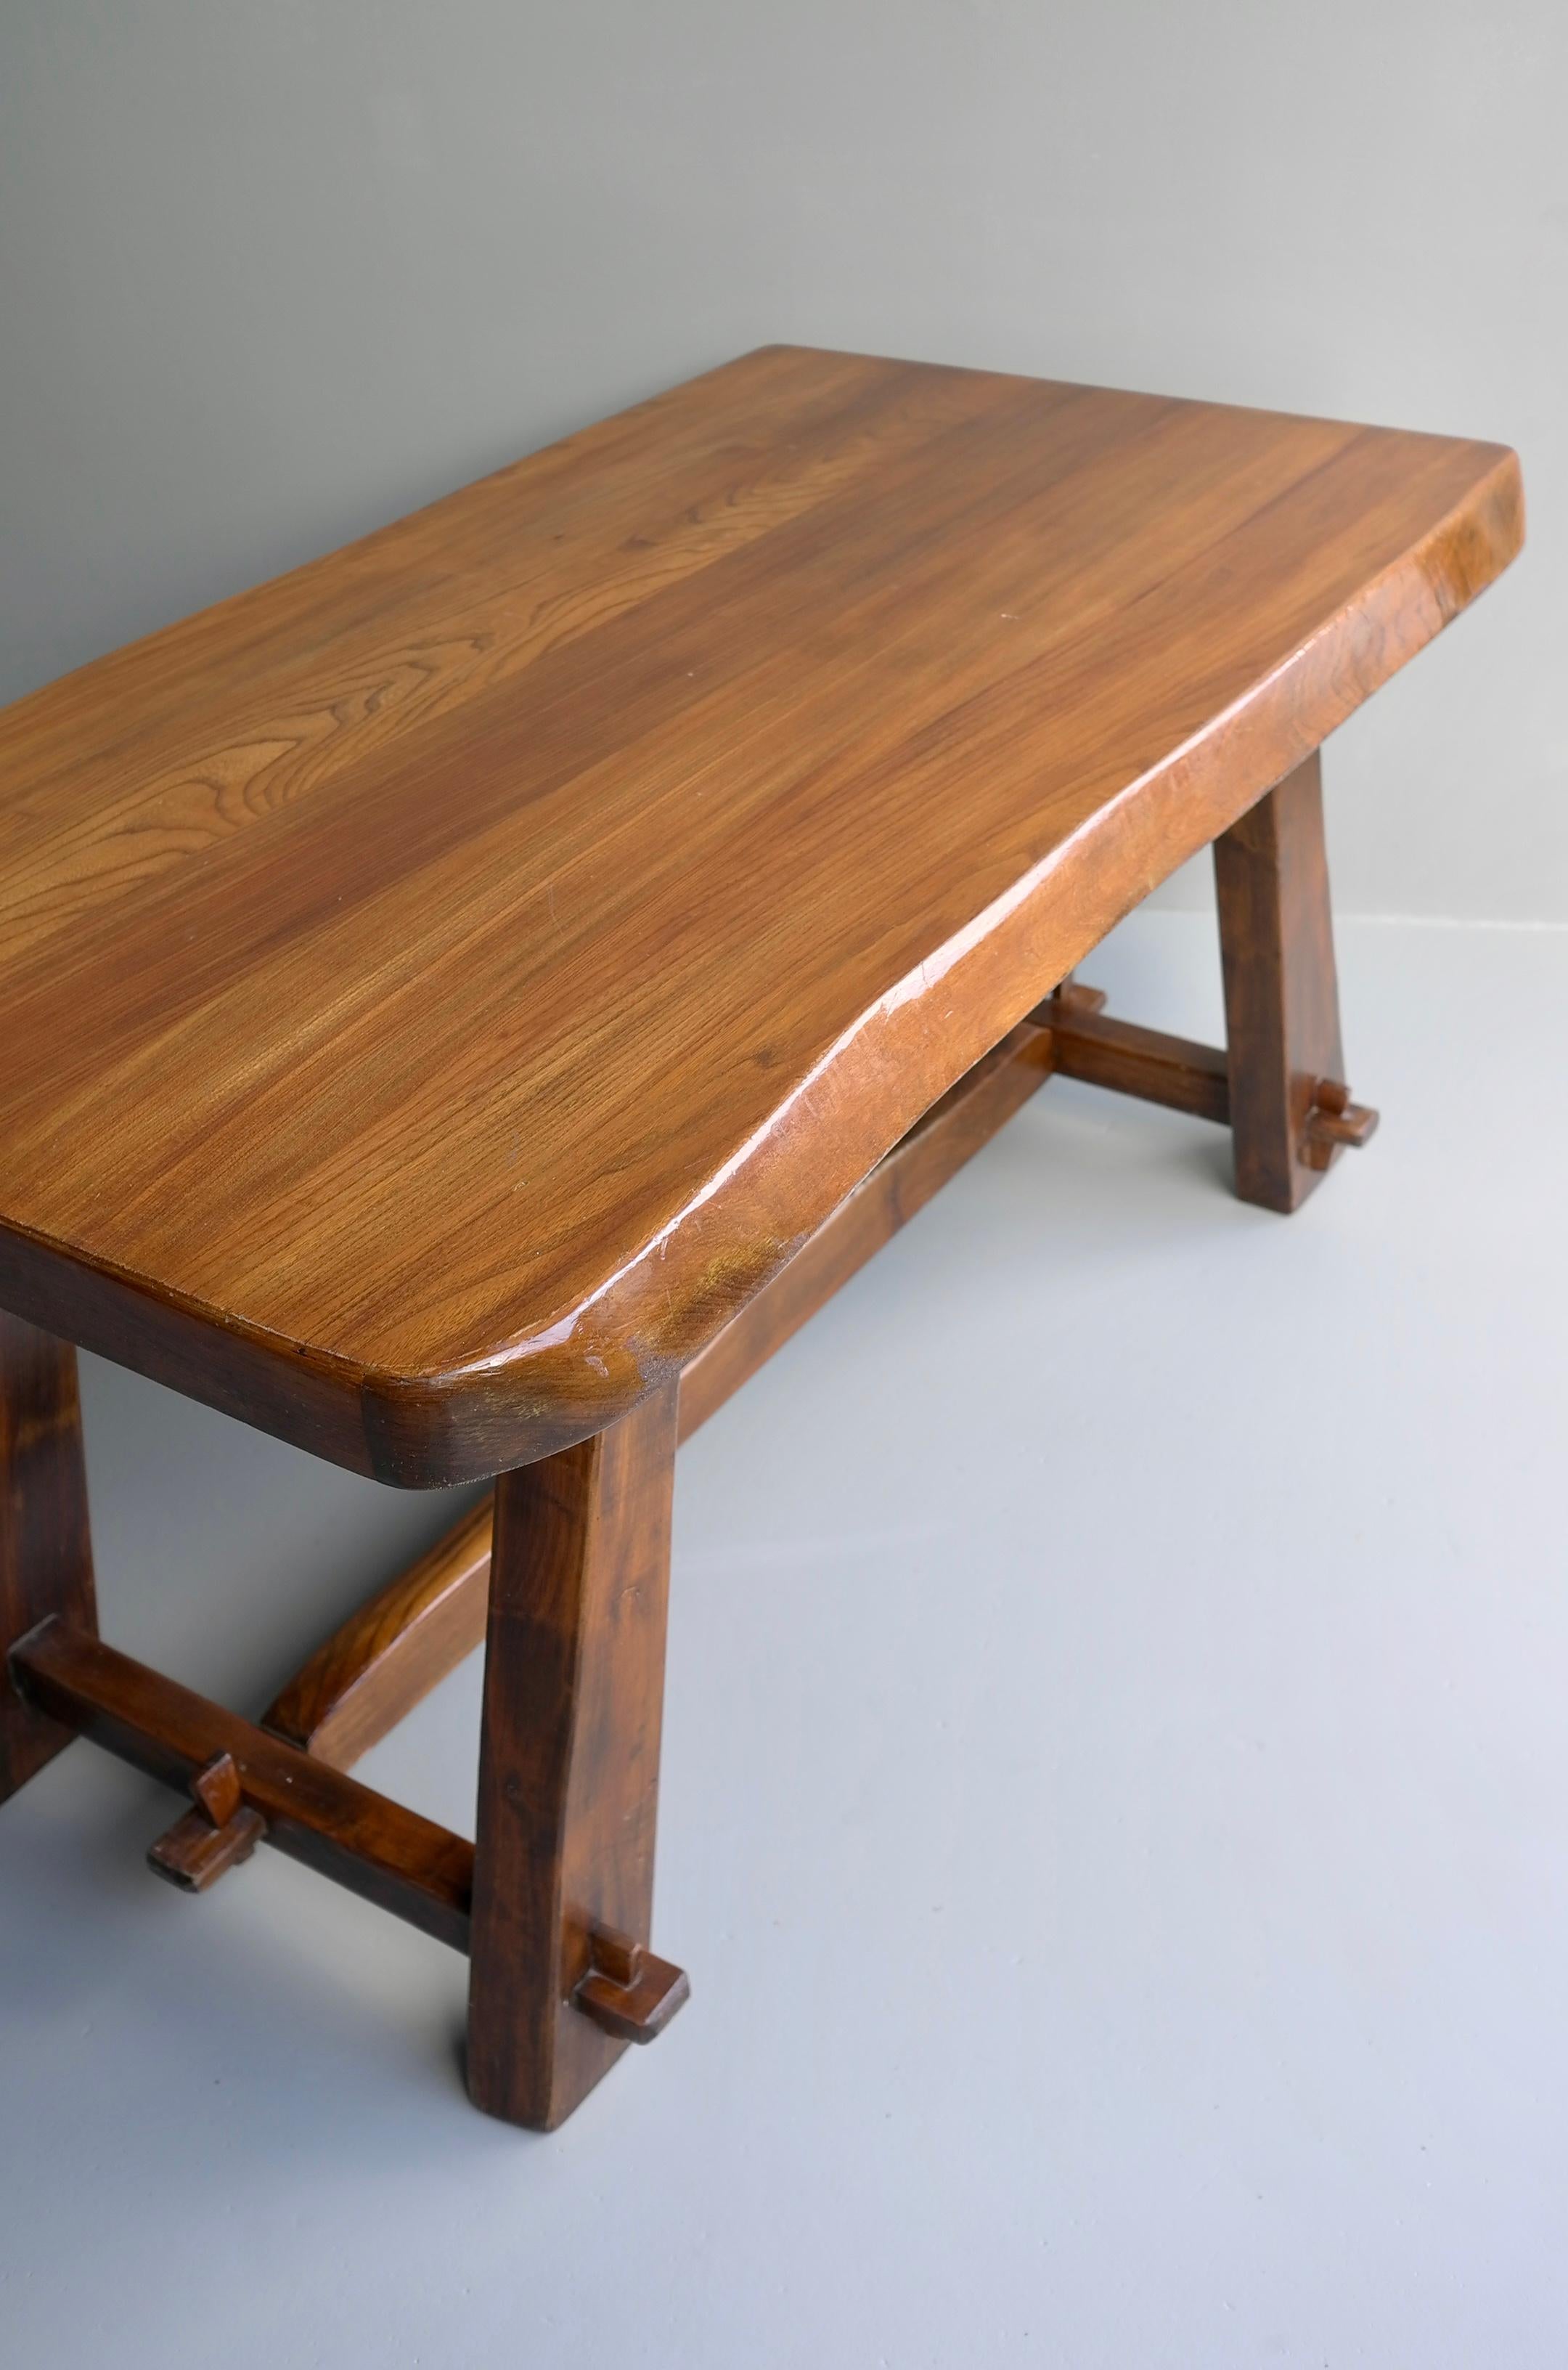 Organic Elmwood Dining Room Table by Aranjou, France 1960's For Sale 1